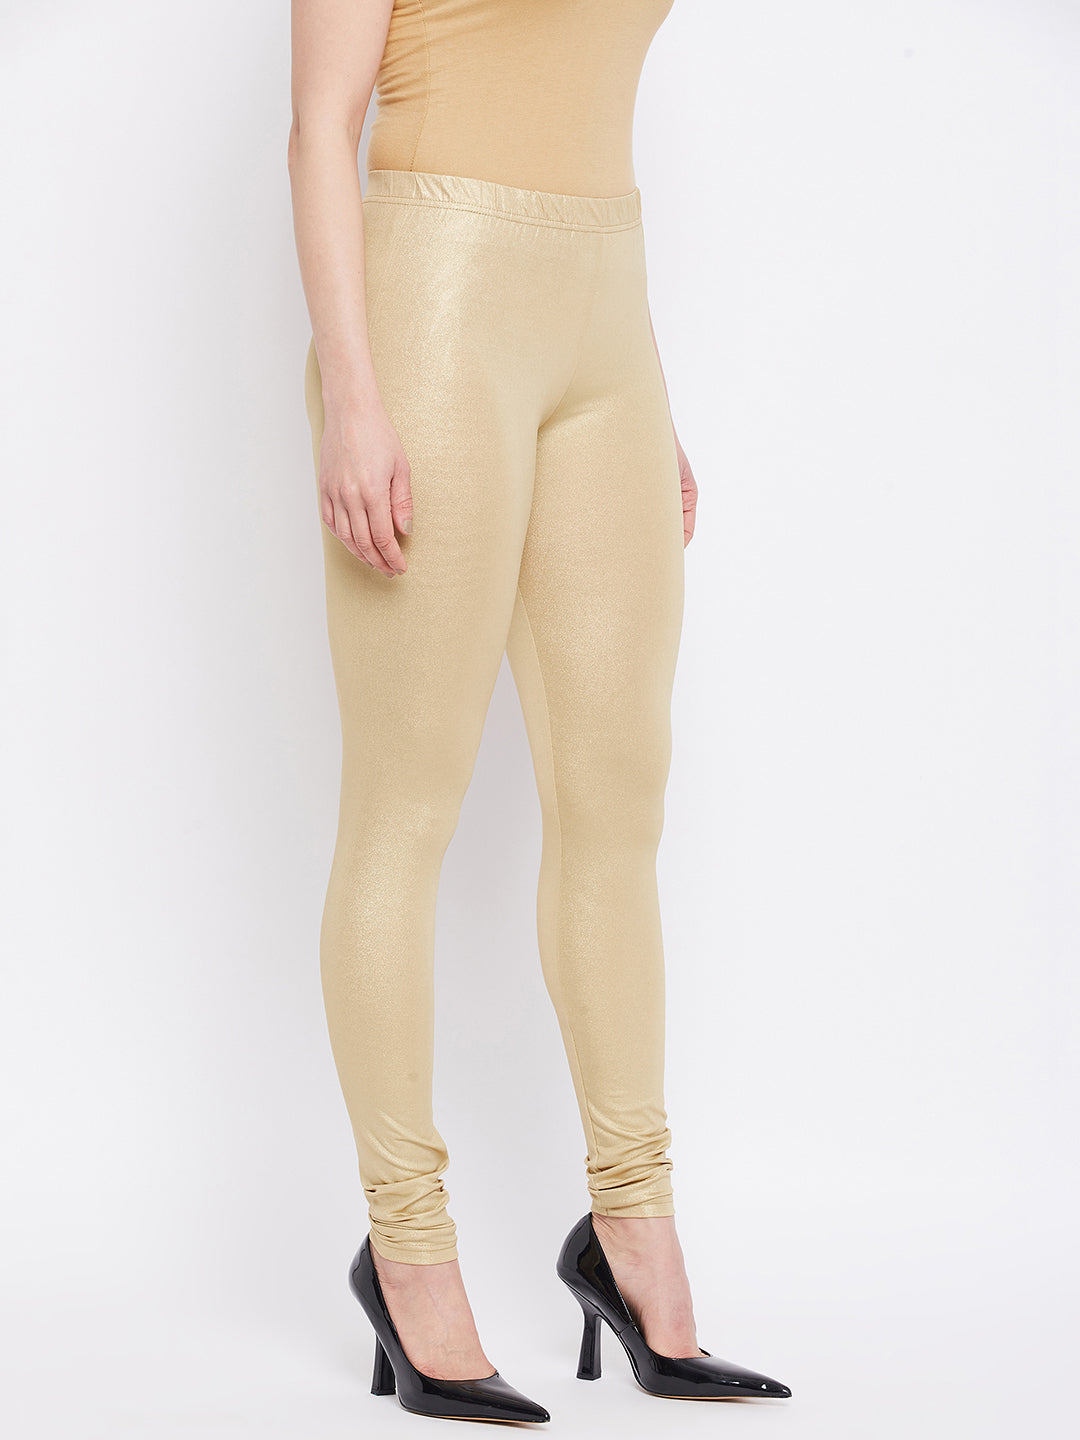 Shimmer Light Gold Leggings  The Pajama factory – The Pajama Factory